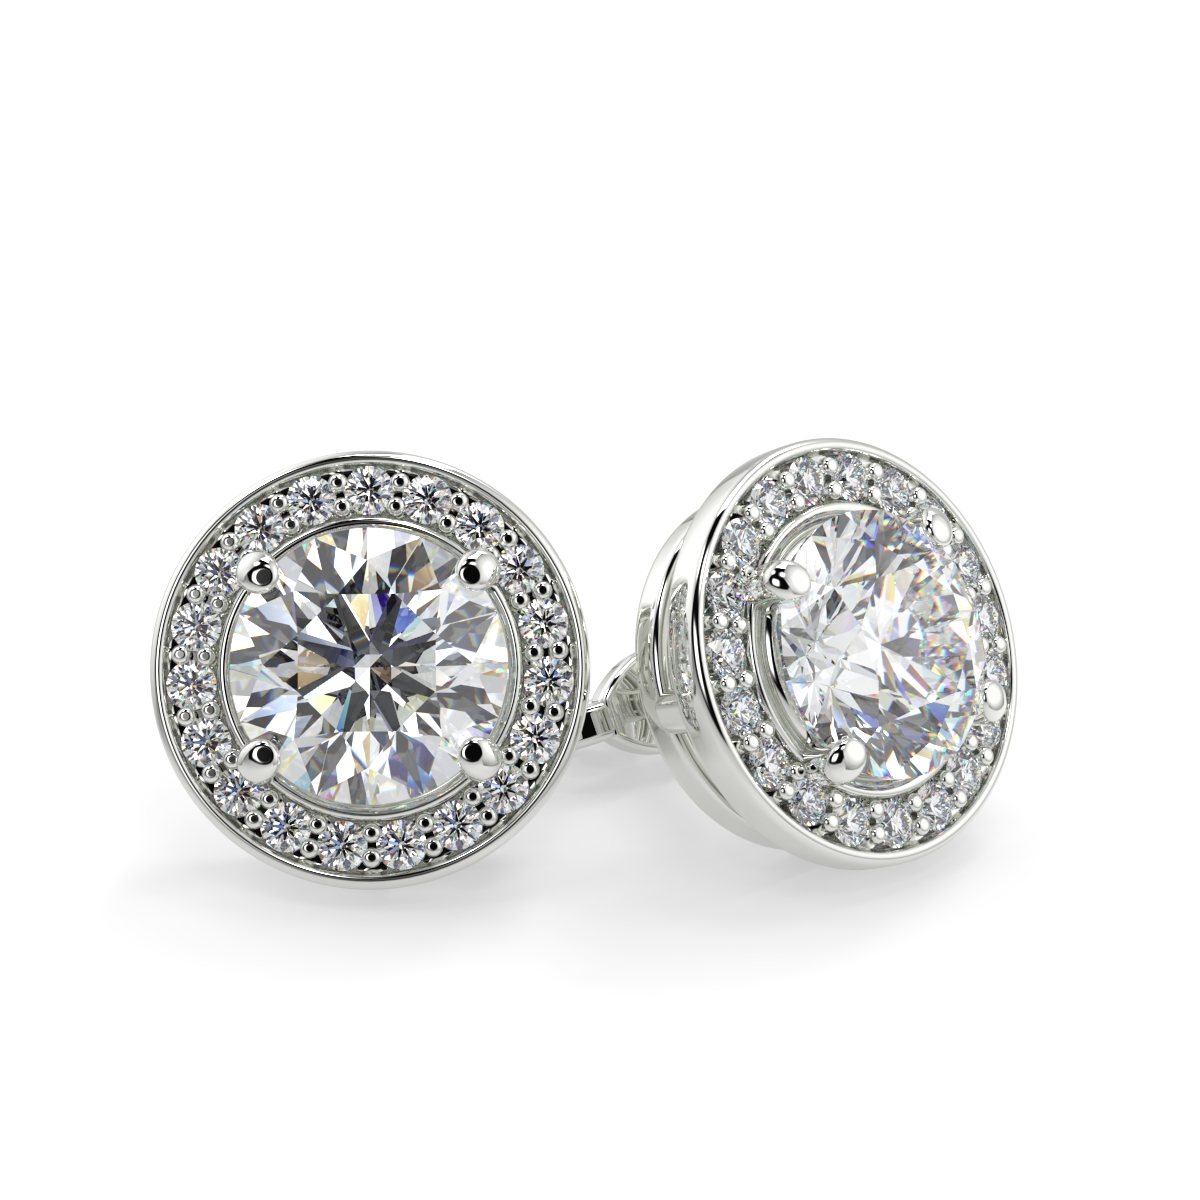 ROUND HALO PAVE SET EARRING